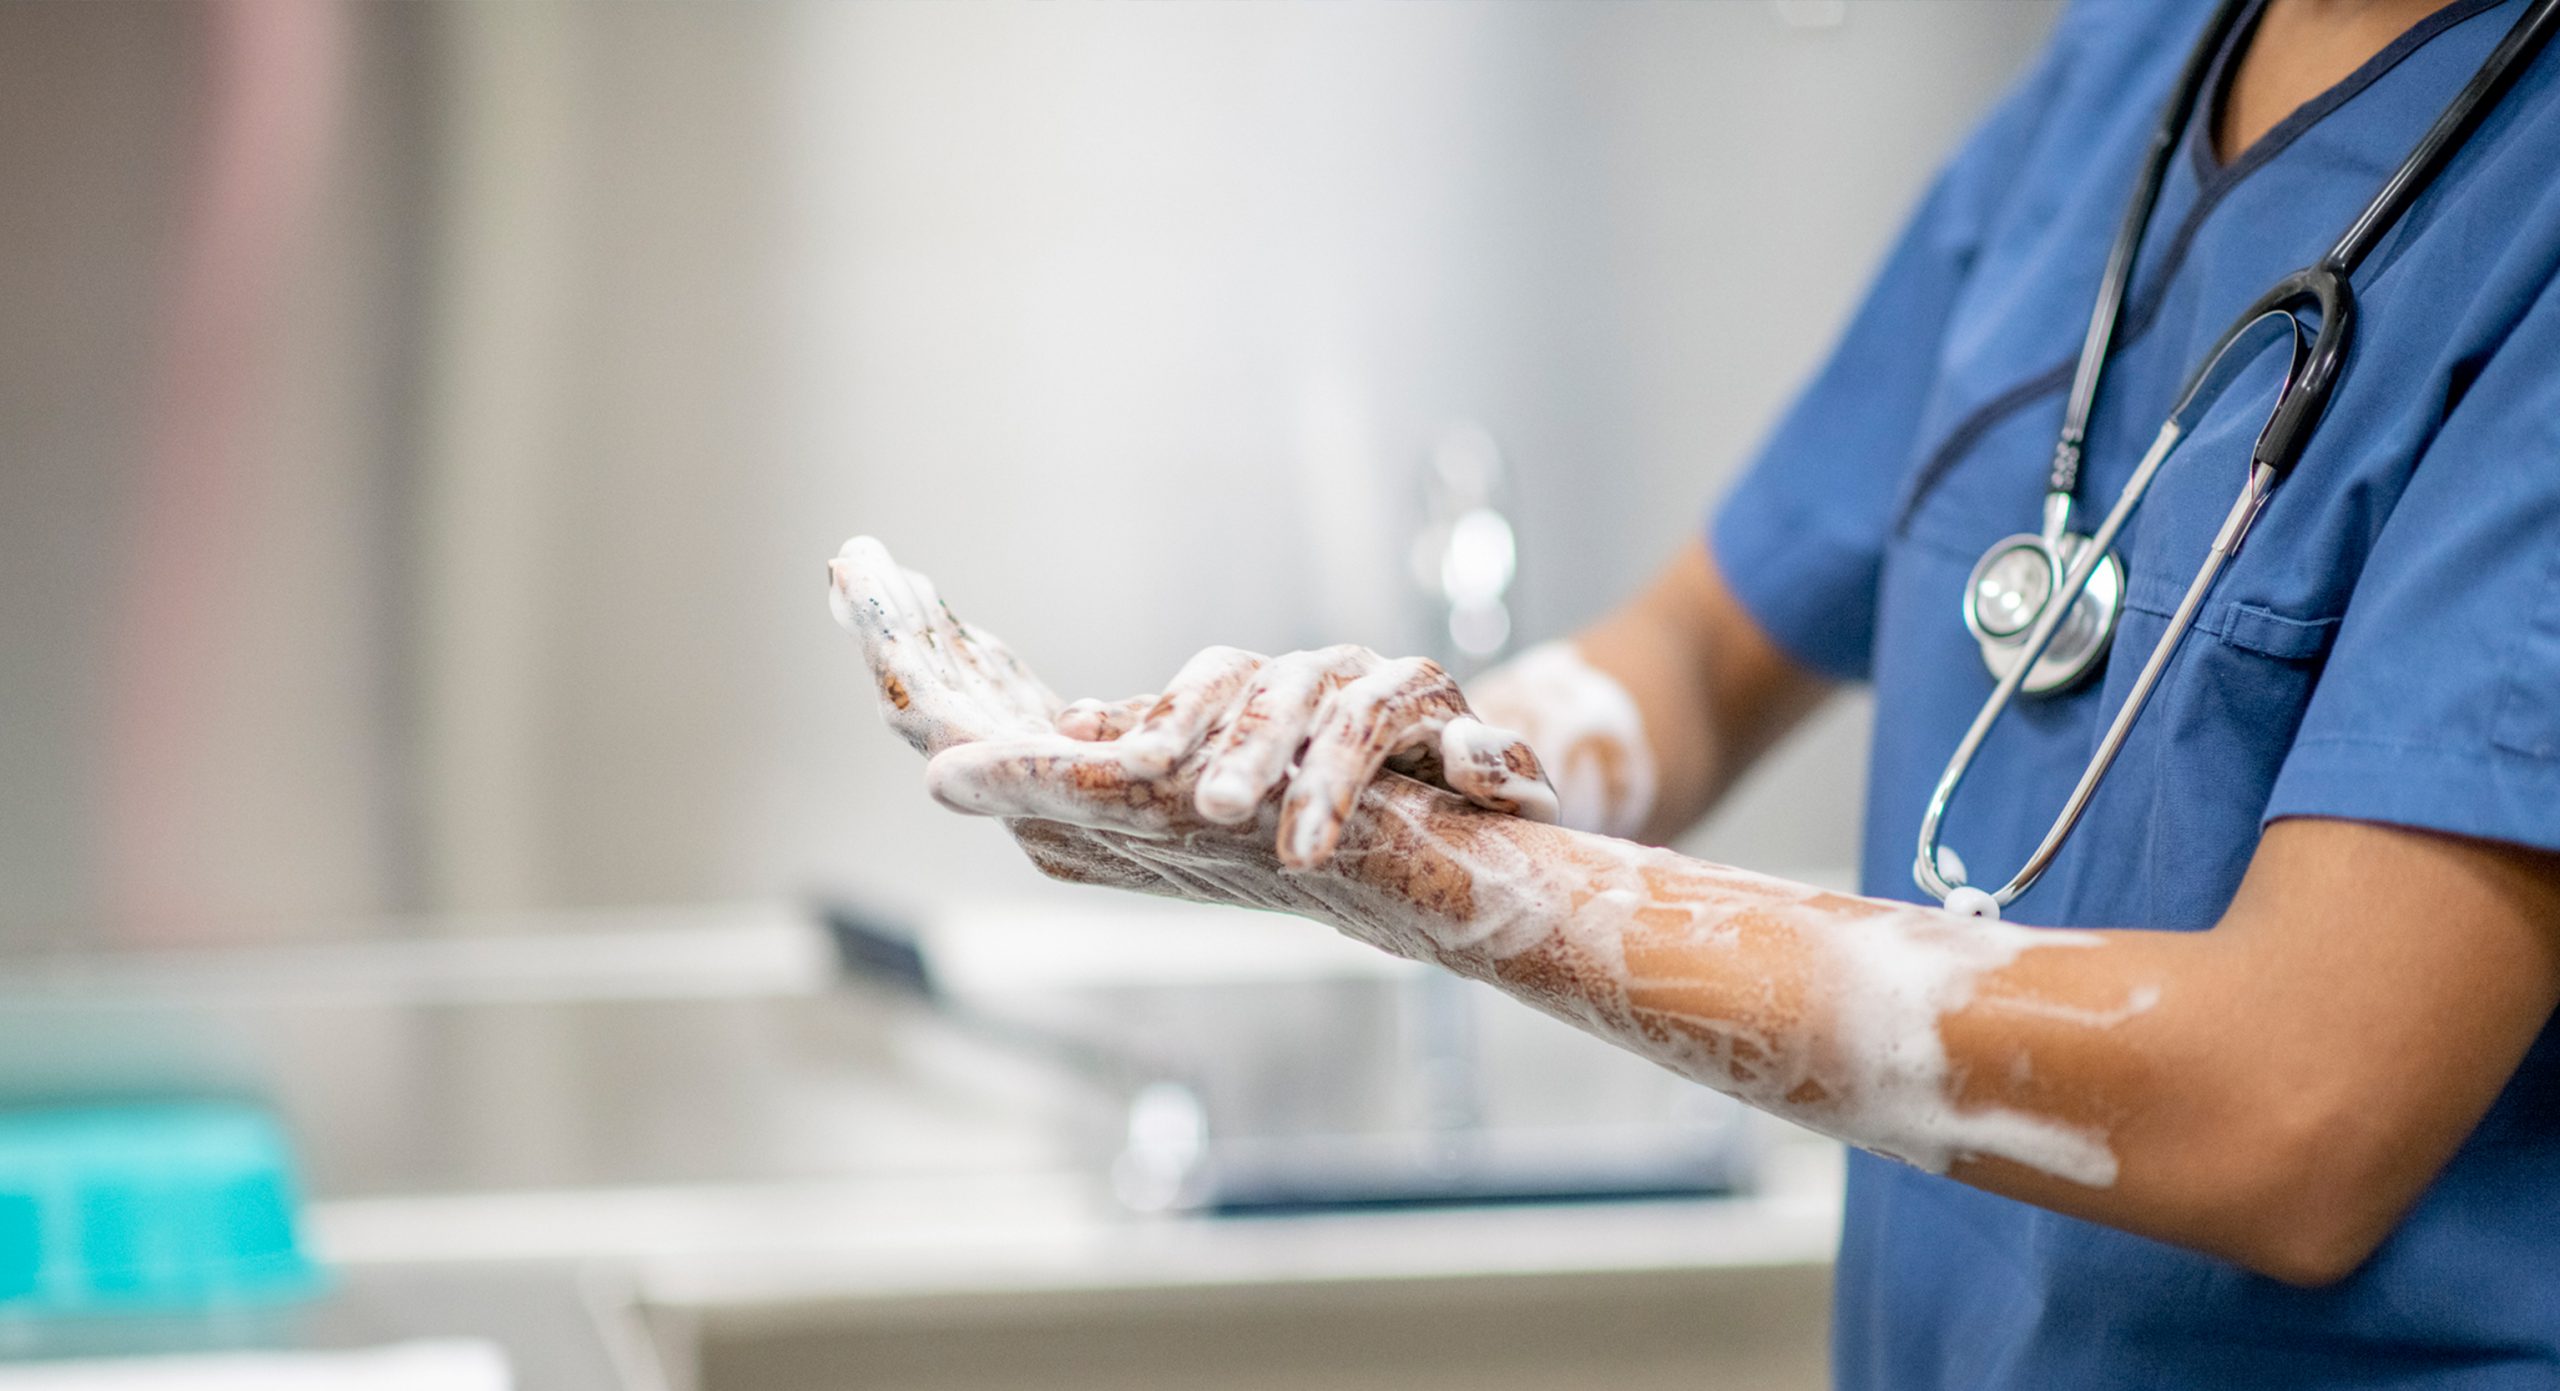 A health care worker washing their hands.